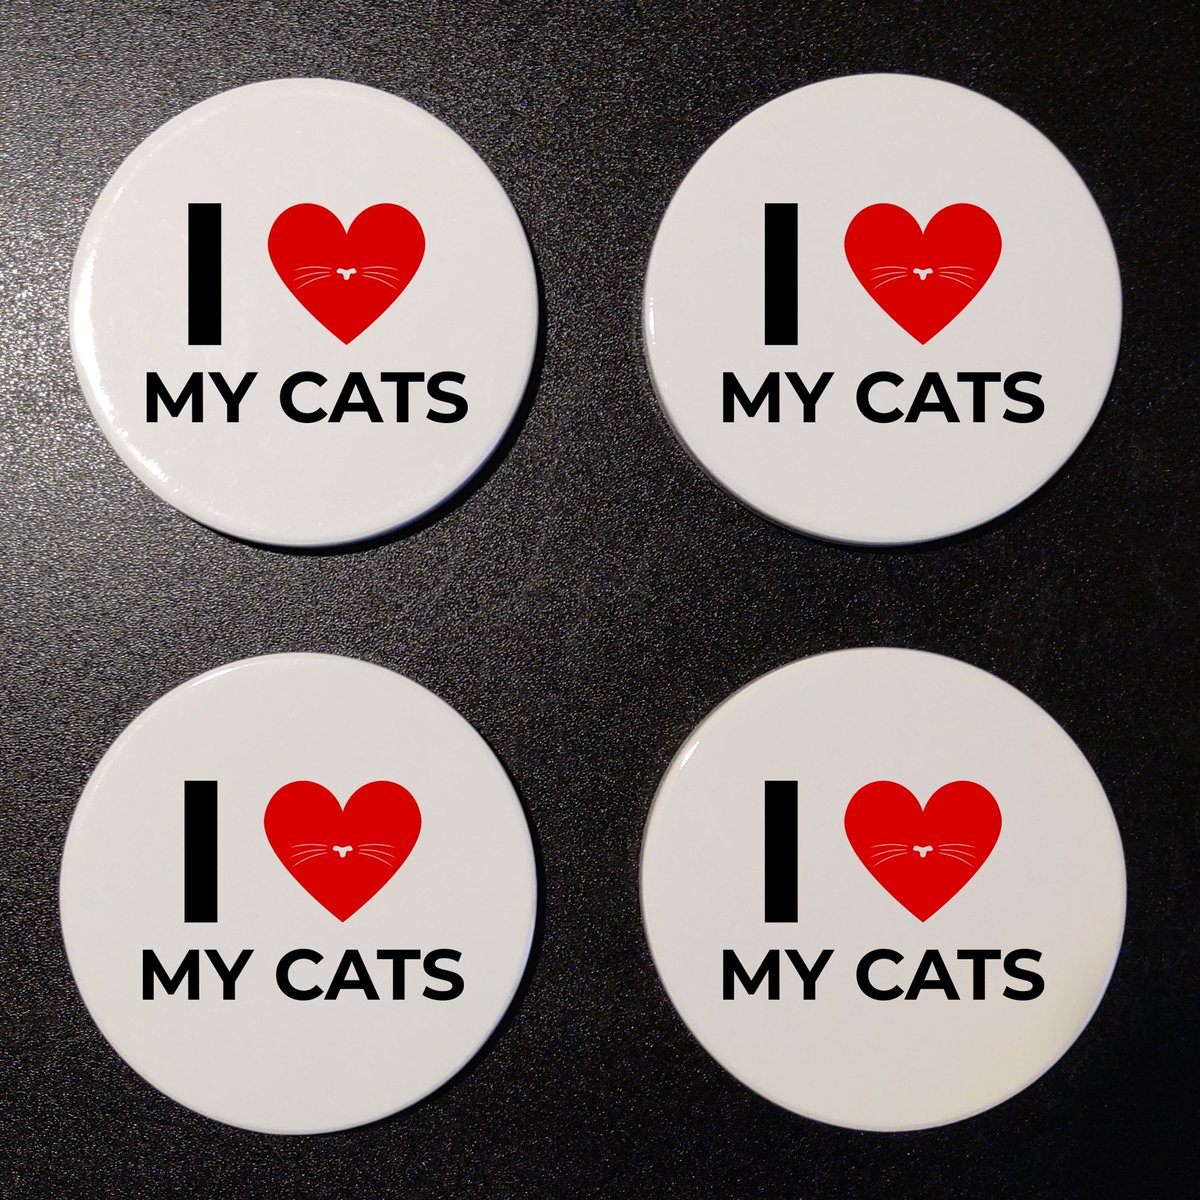 Happy Caturday!!! 😺🎉 Check out my 'I ❤️ My Cat' and 'I ❤️ My Cats' Round Ceramic Drink Coasters, which are available in my Etsy Shop!

etsy.com/listing/113550…
.
.
.
#etsy #etsyseller #etsyshop #etsyfinds #cricut #coasters #drinkcoasters #cat #cats #catlover #catlovers #caturday